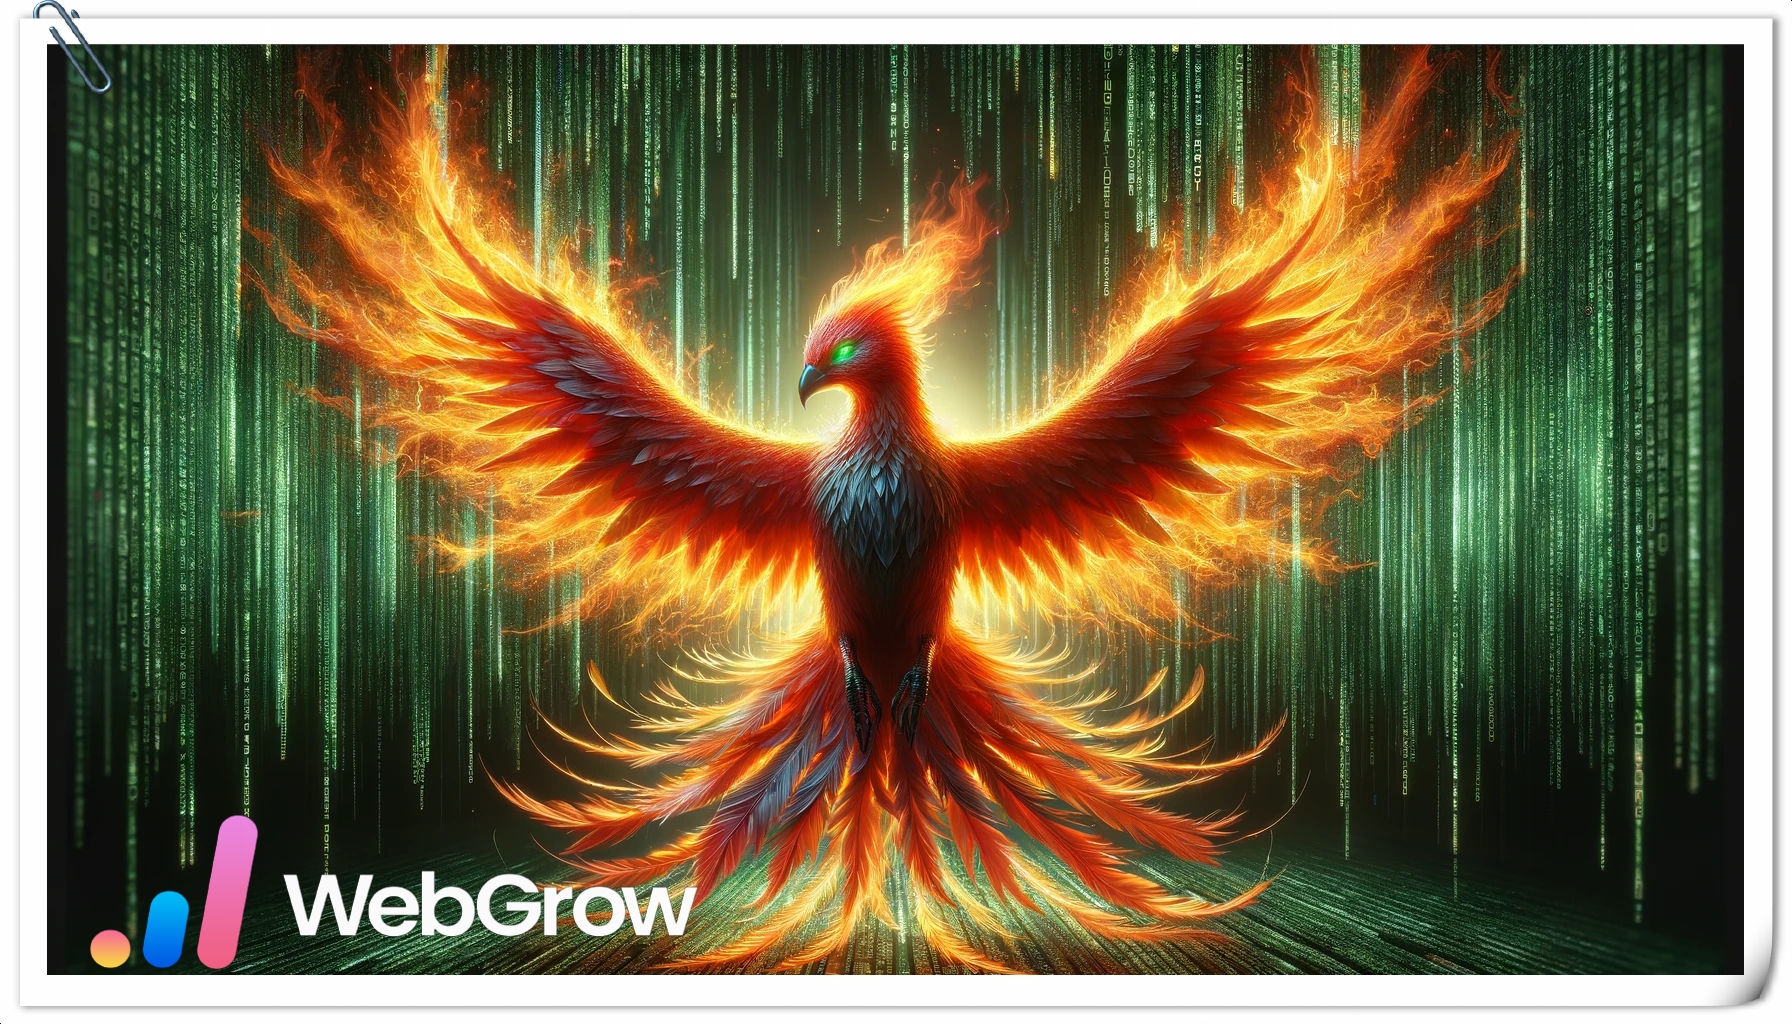 Ultra-high-definition, hyperrealistic image of a Phoenix in rebirth against a Matrix-style background. The Phoenix is radiant with vibrant, fiery colo (4)